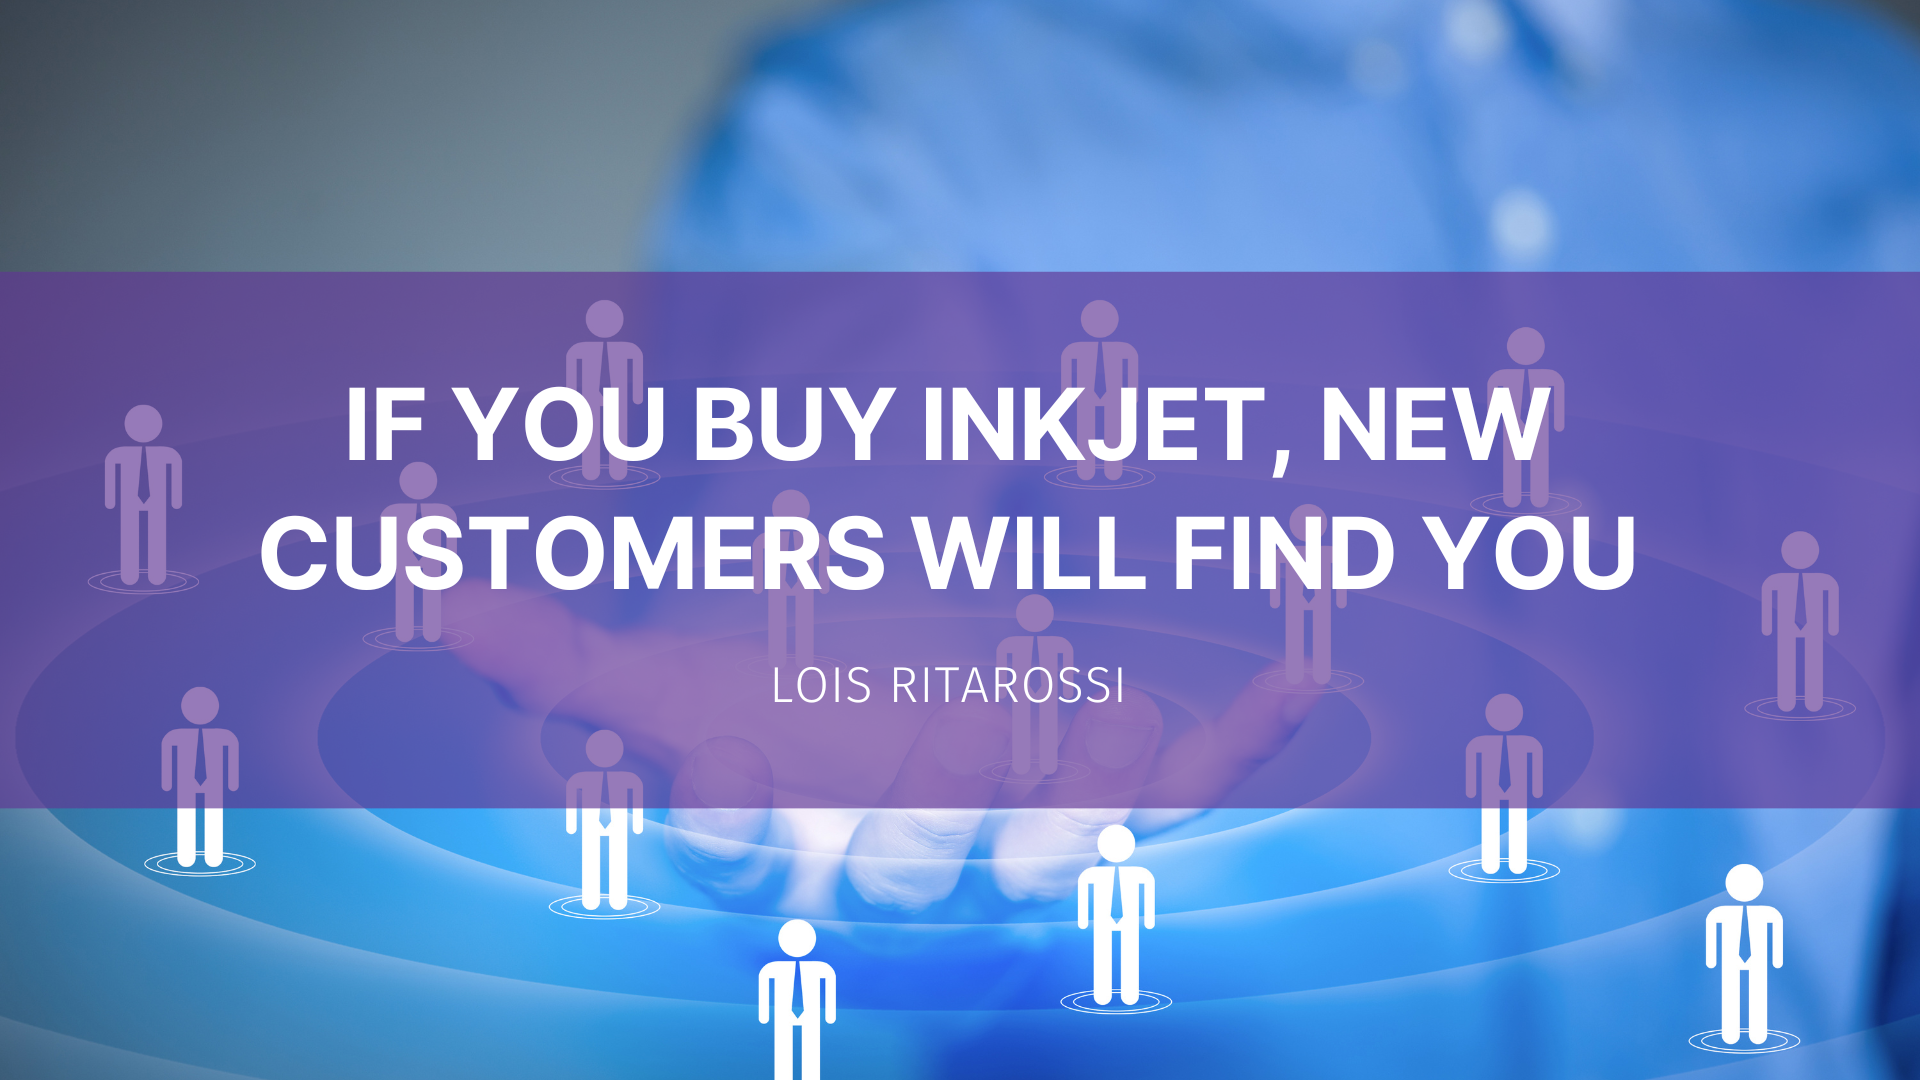 Featured image for “If You Buy Inkjet, New Customers Will Find You”